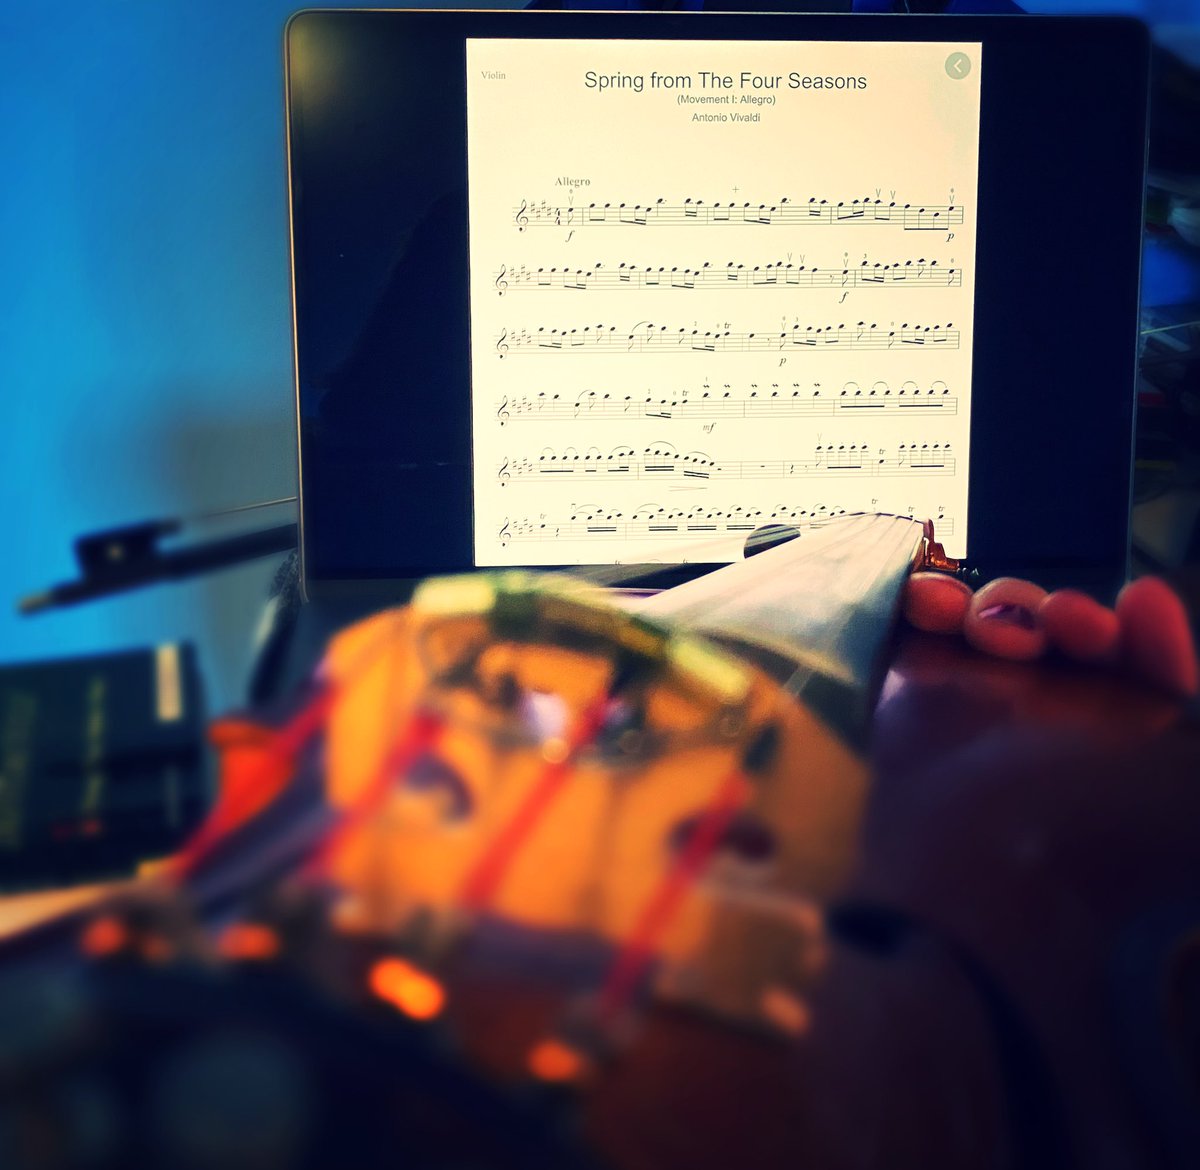 Music therapy this first day of spring. #SpringBreakGoals #Vivaldi #SelfCare #FiddleAround